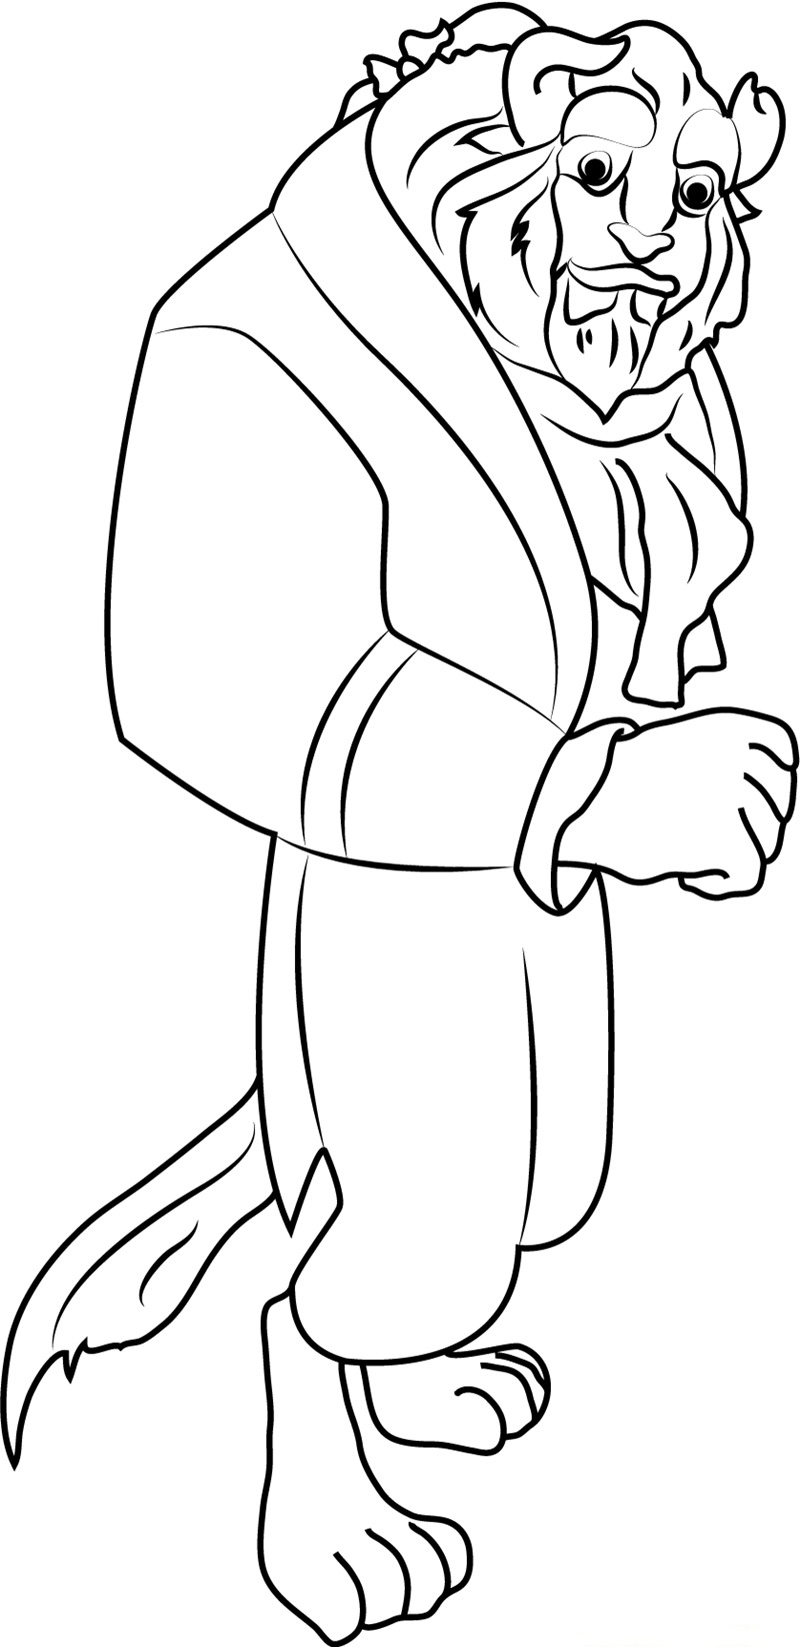 The Beast Gentlement Coloring Page